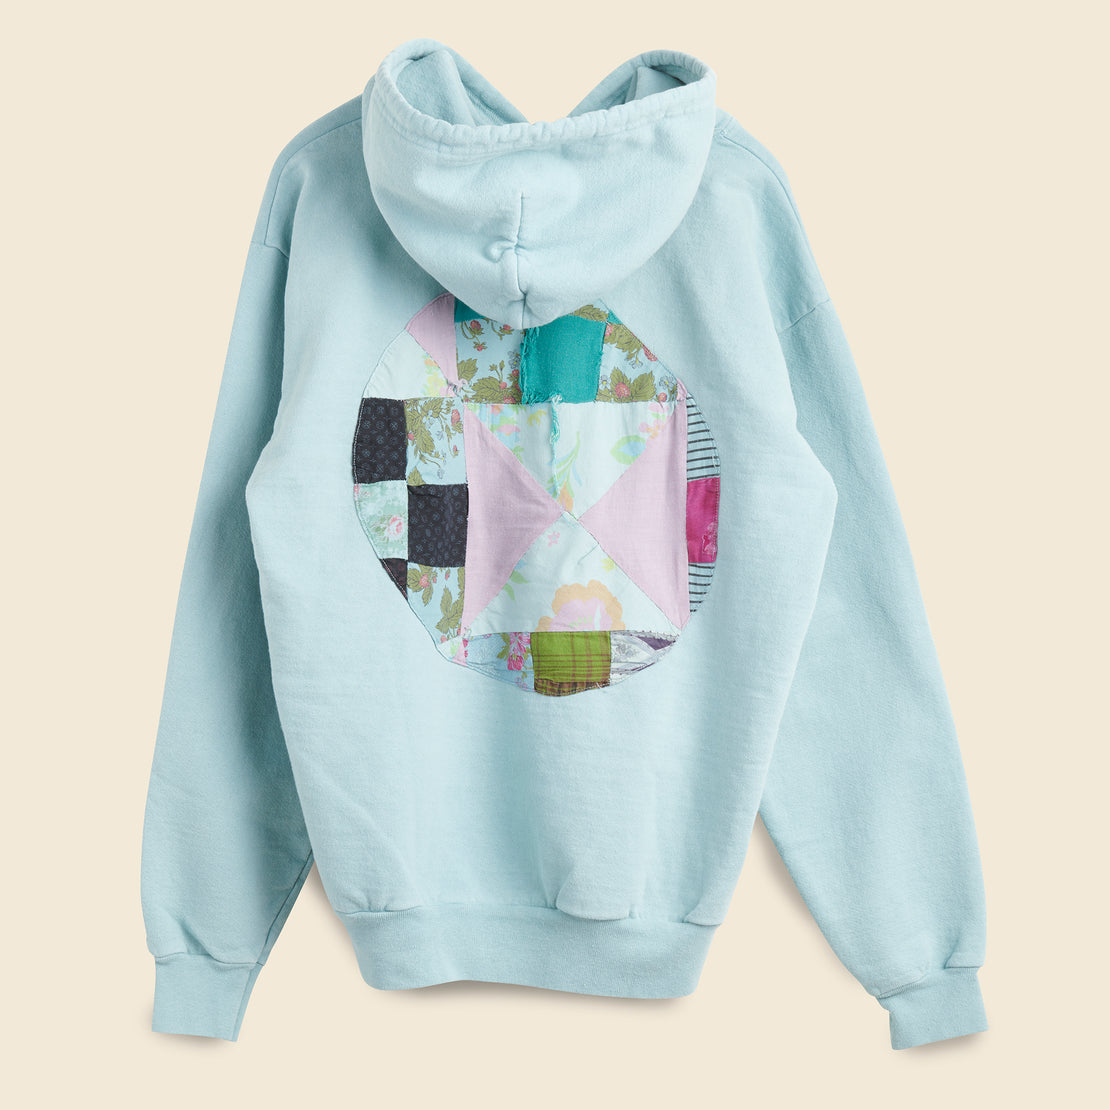 Patchwork Hoodie - Sky Overdye - Carleen - STAG Provisions - W - Tops - L/S Fleece